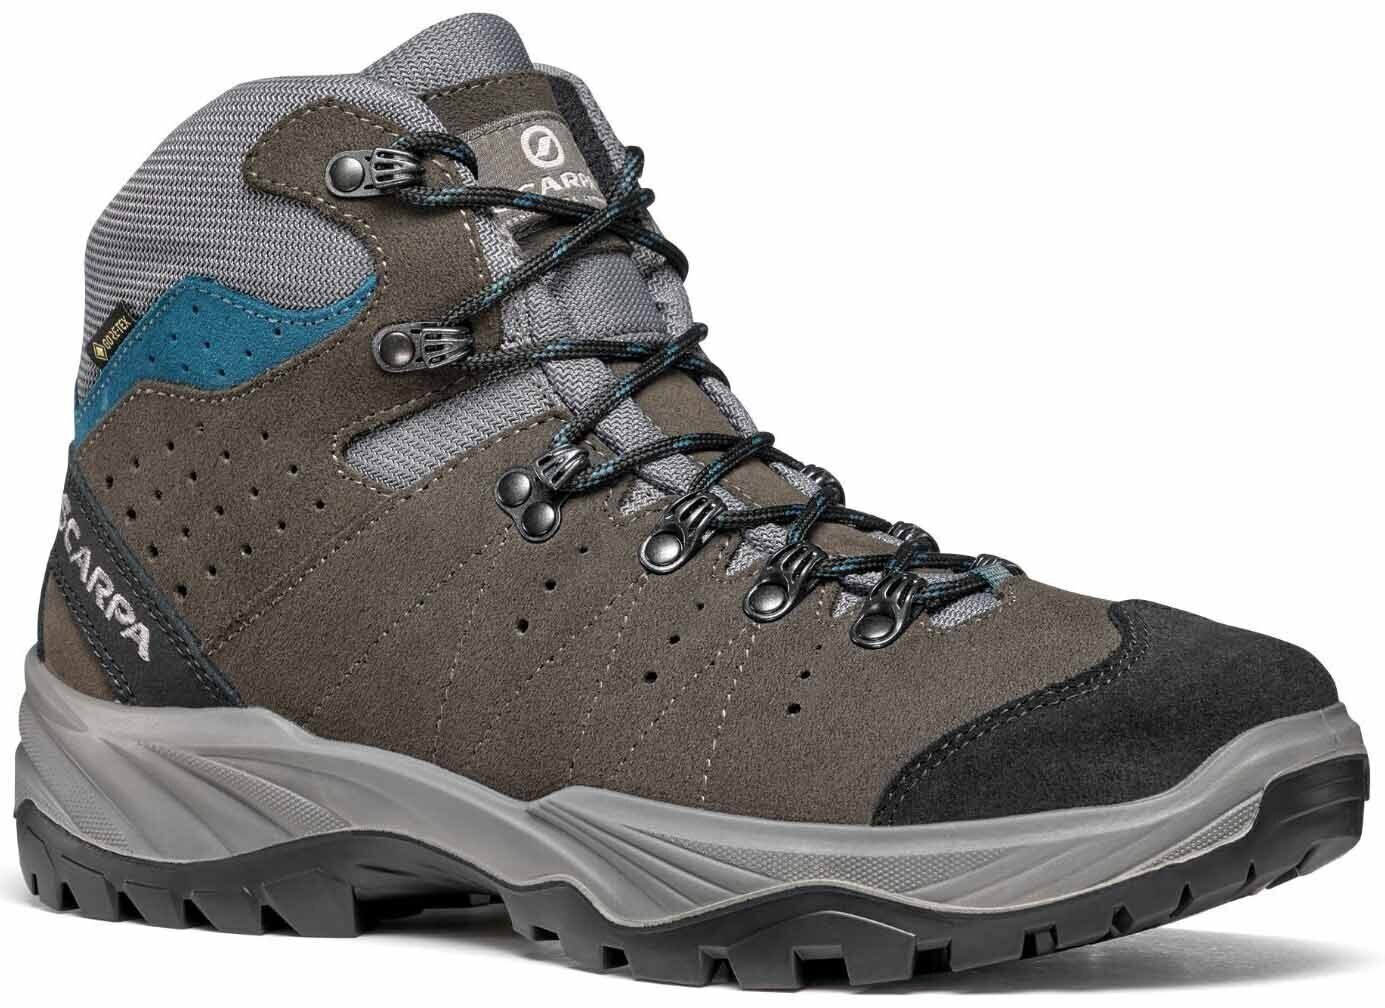 Chaussures outdoor hommes Scarpa Mistral Gore Tex Smoke/Lake Blue 37 Chaussures outdoor hommes